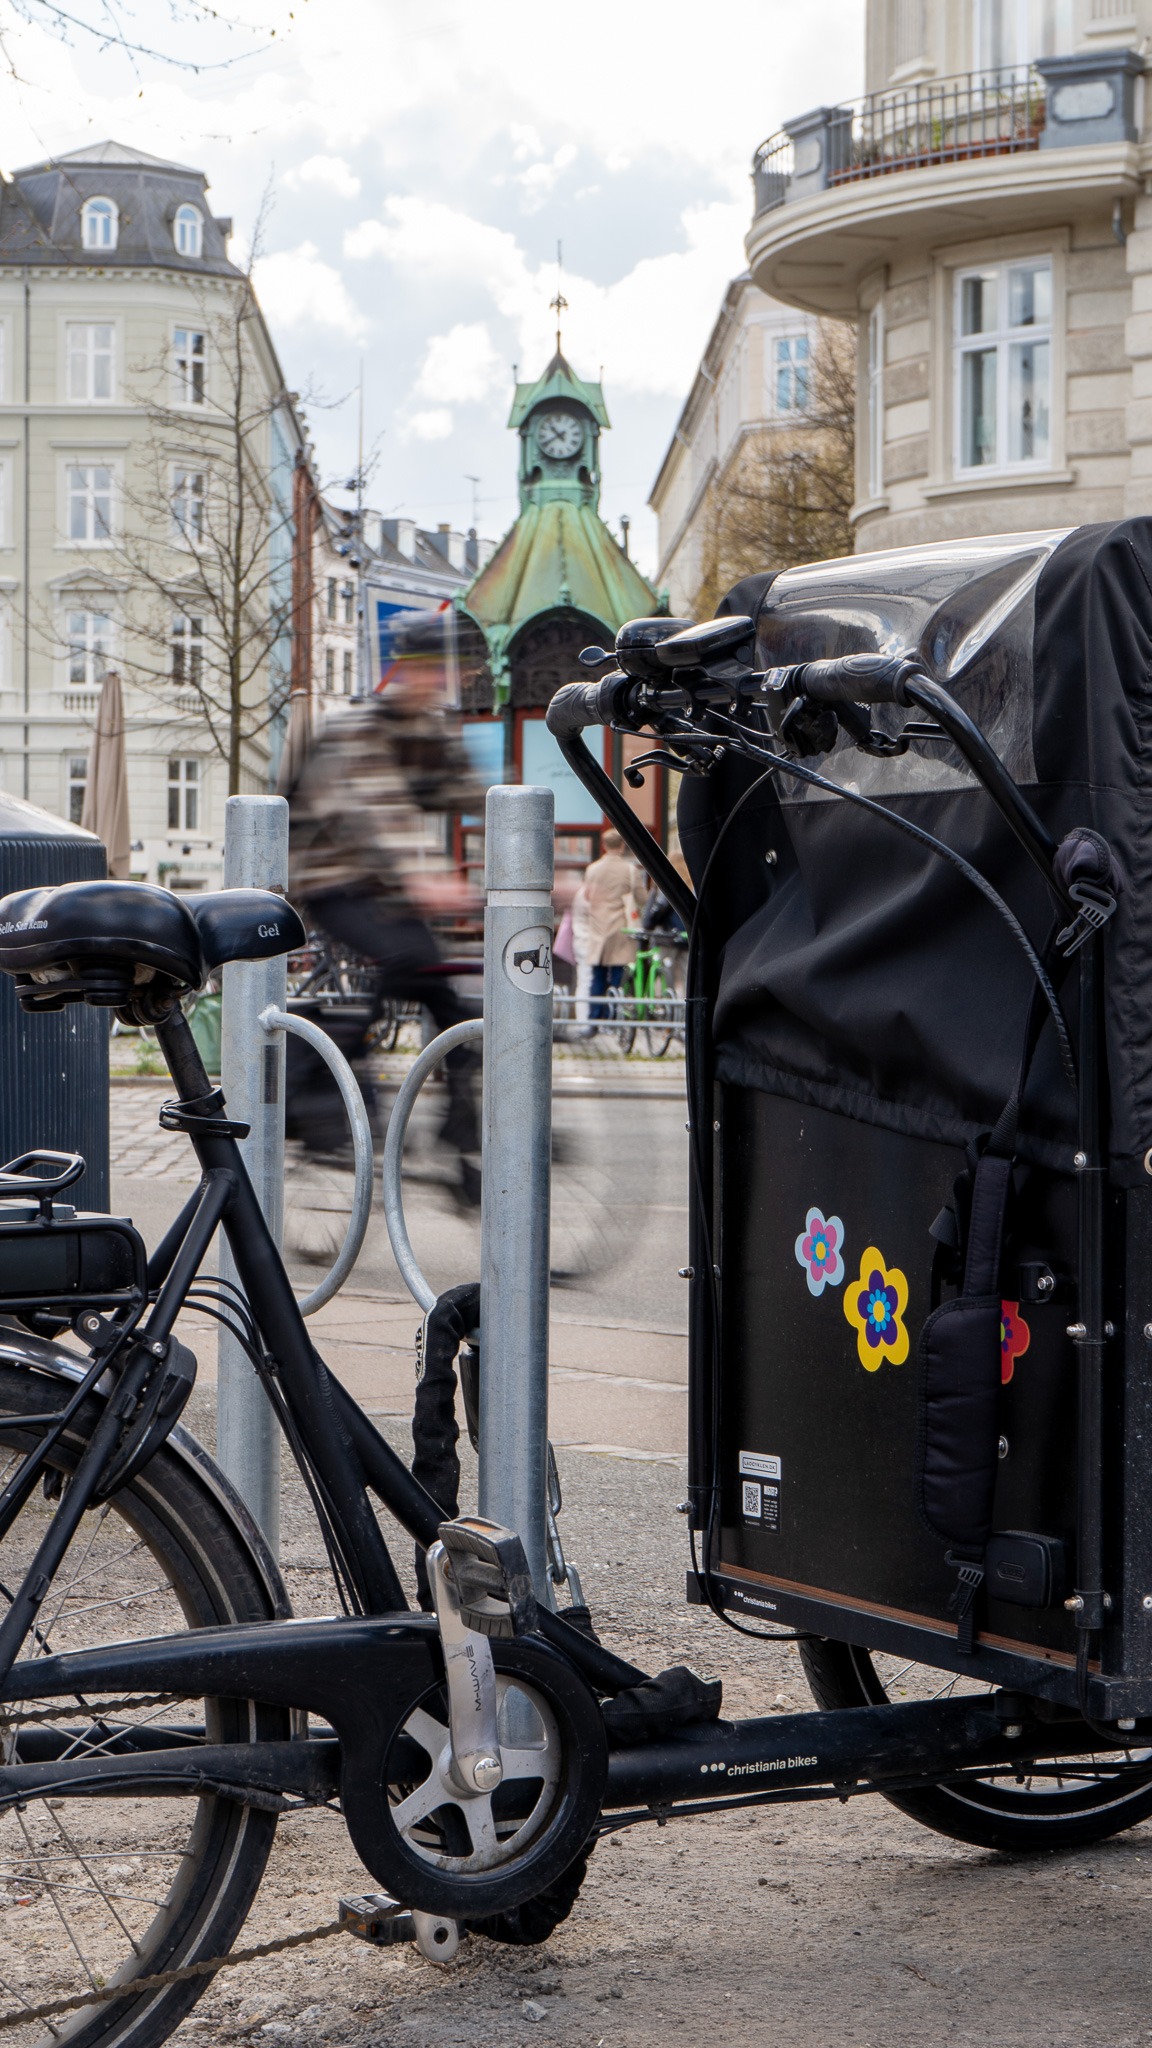 The first bicycle parking stands appear in Copenhagen